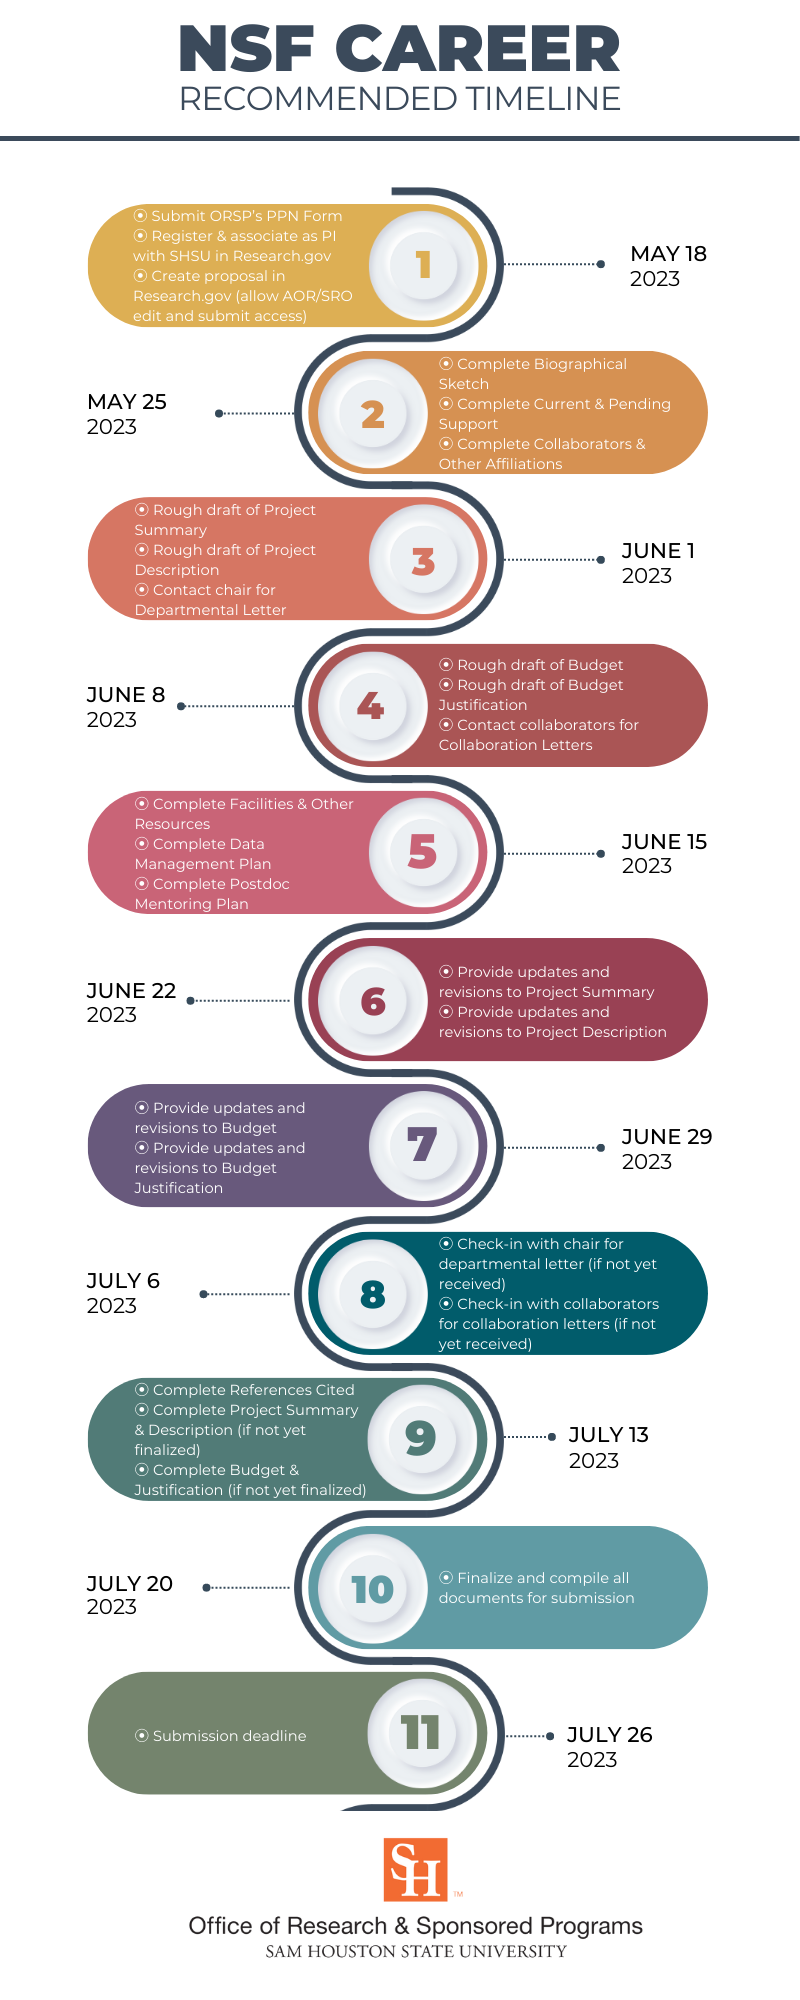 NSF CAREER 2023 Submission Timeline